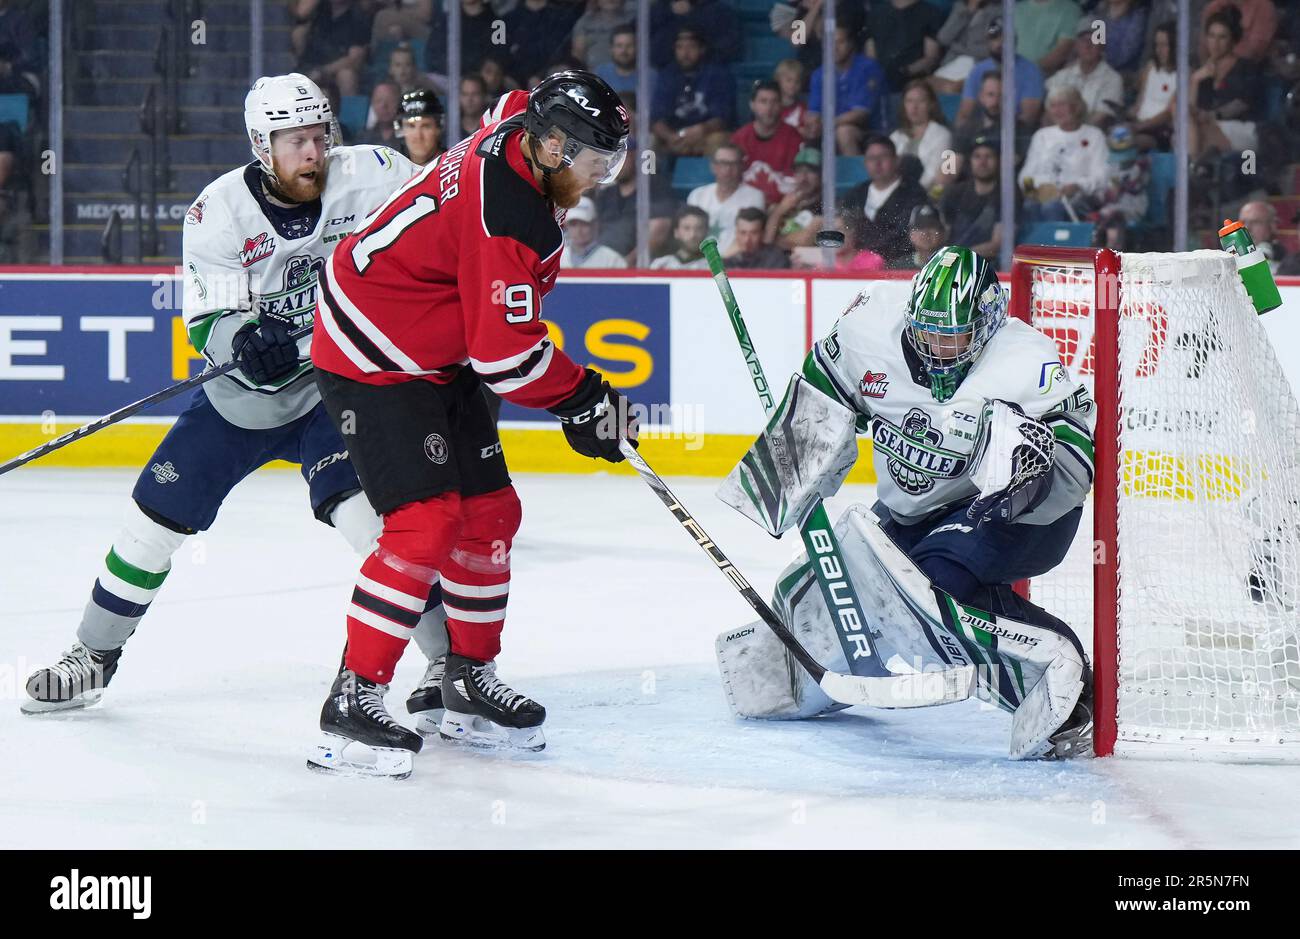 The puck deflects off the mask of Seattle Thunderbirds goalie Thomas Milic, right, as Quebec Remparts Nathan Gaucher (91) and Thunderbirds Luke Prokop (6) watch during second-period CHL Memorial Cup final hockey